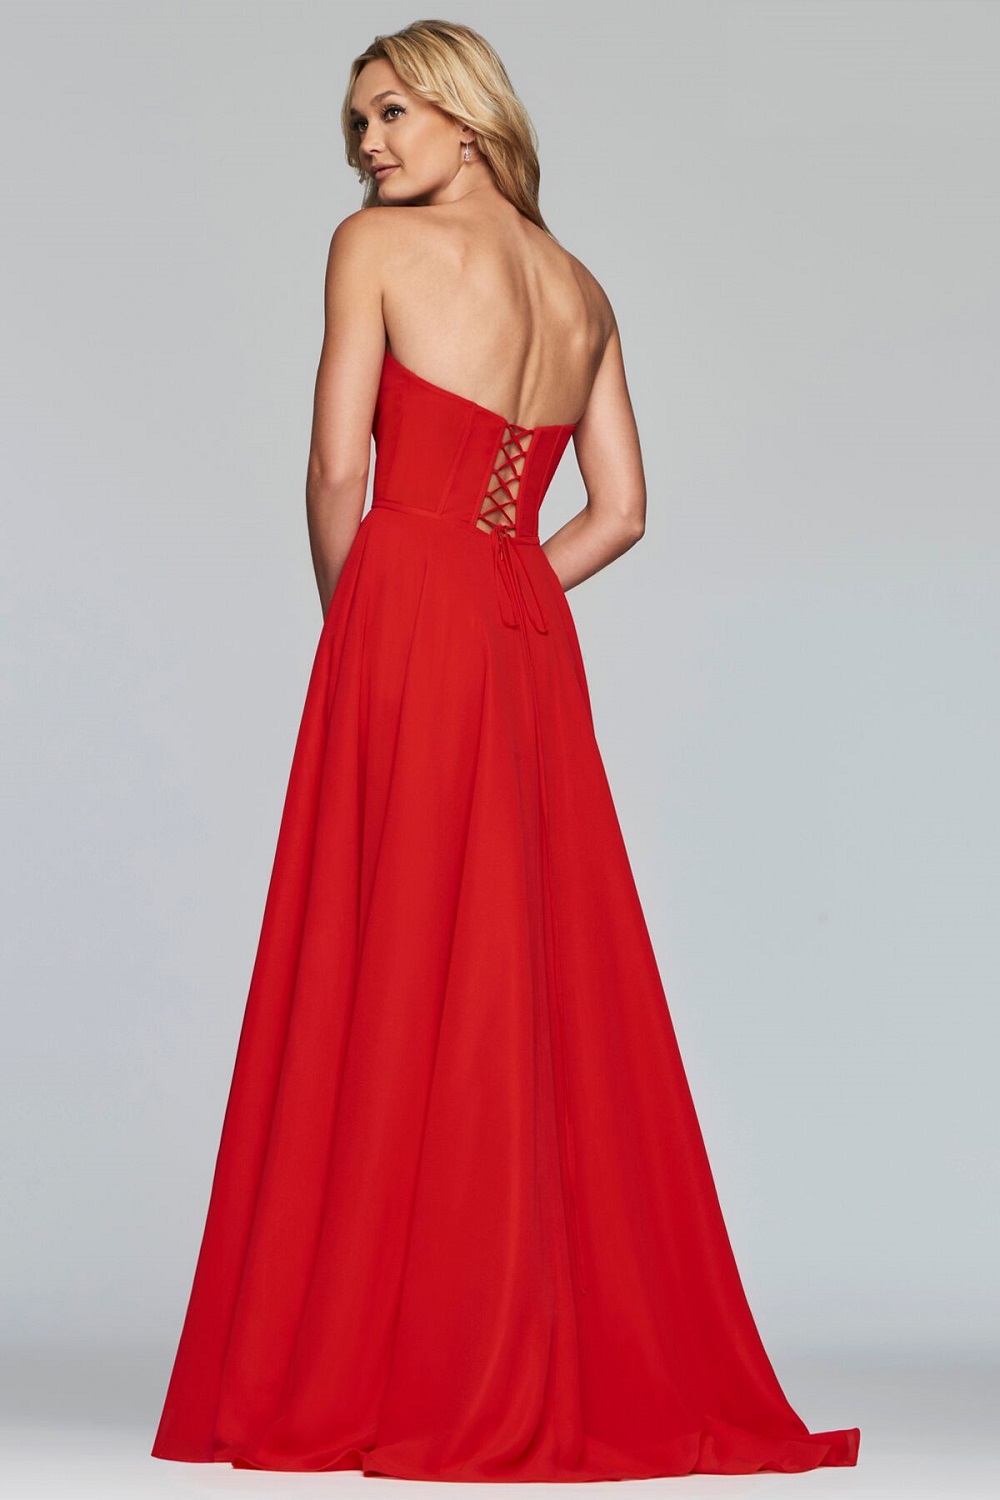  Plunging  sweetheart neck  a line chiffon prom  dress  at 